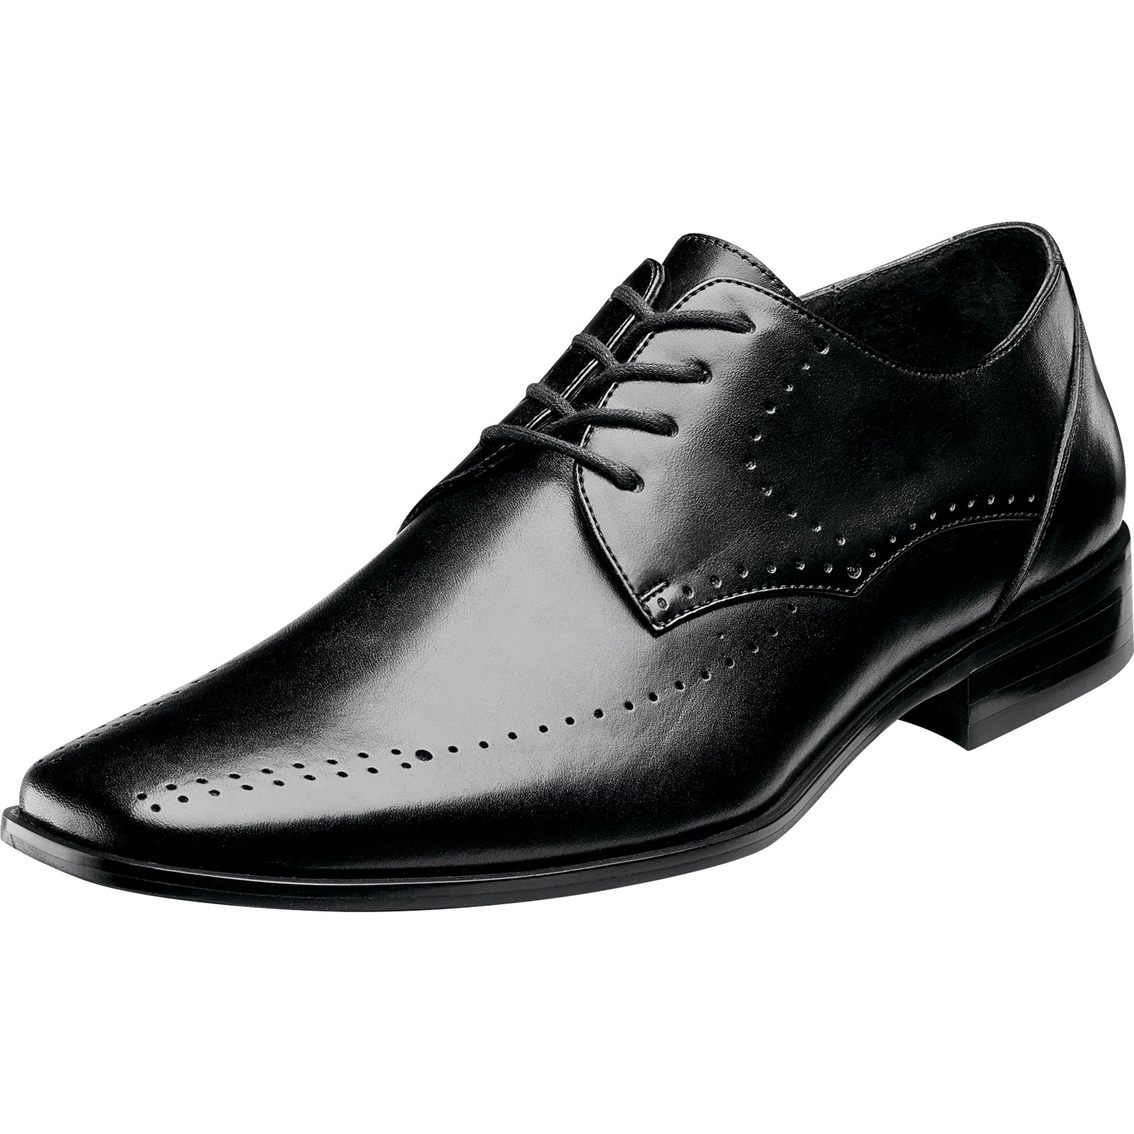 Stacy Adams Men's Atwell Oxford Shoes 